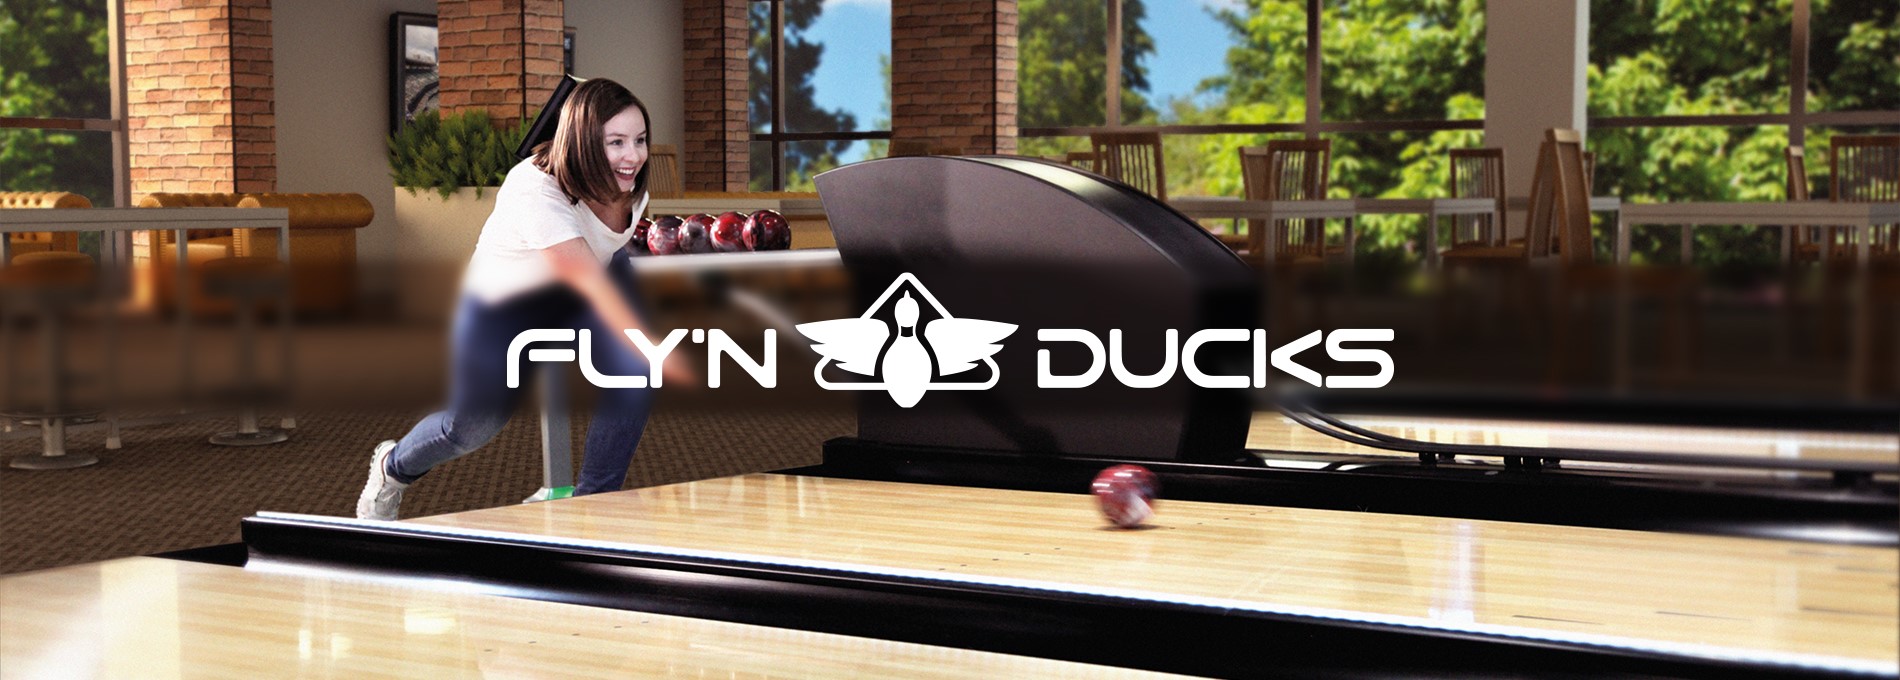 Flyin ducks duckpin bowling QubicaAMF bowling products banner